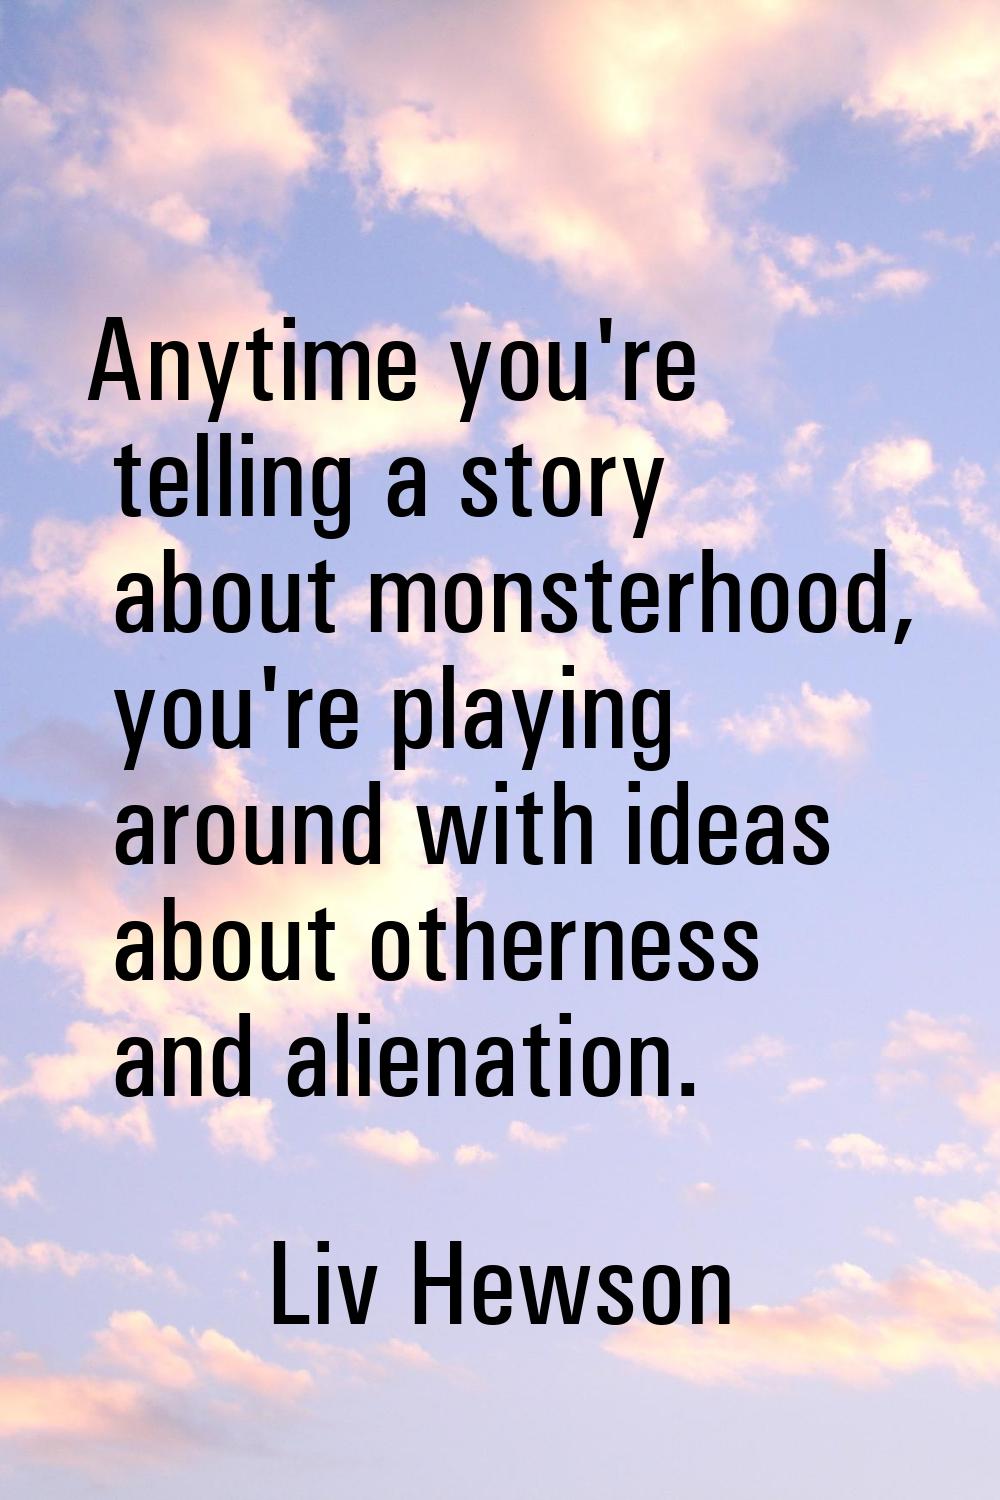 Anytime you're telling a story about monsterhood, you're playing around with ideas about otherness 